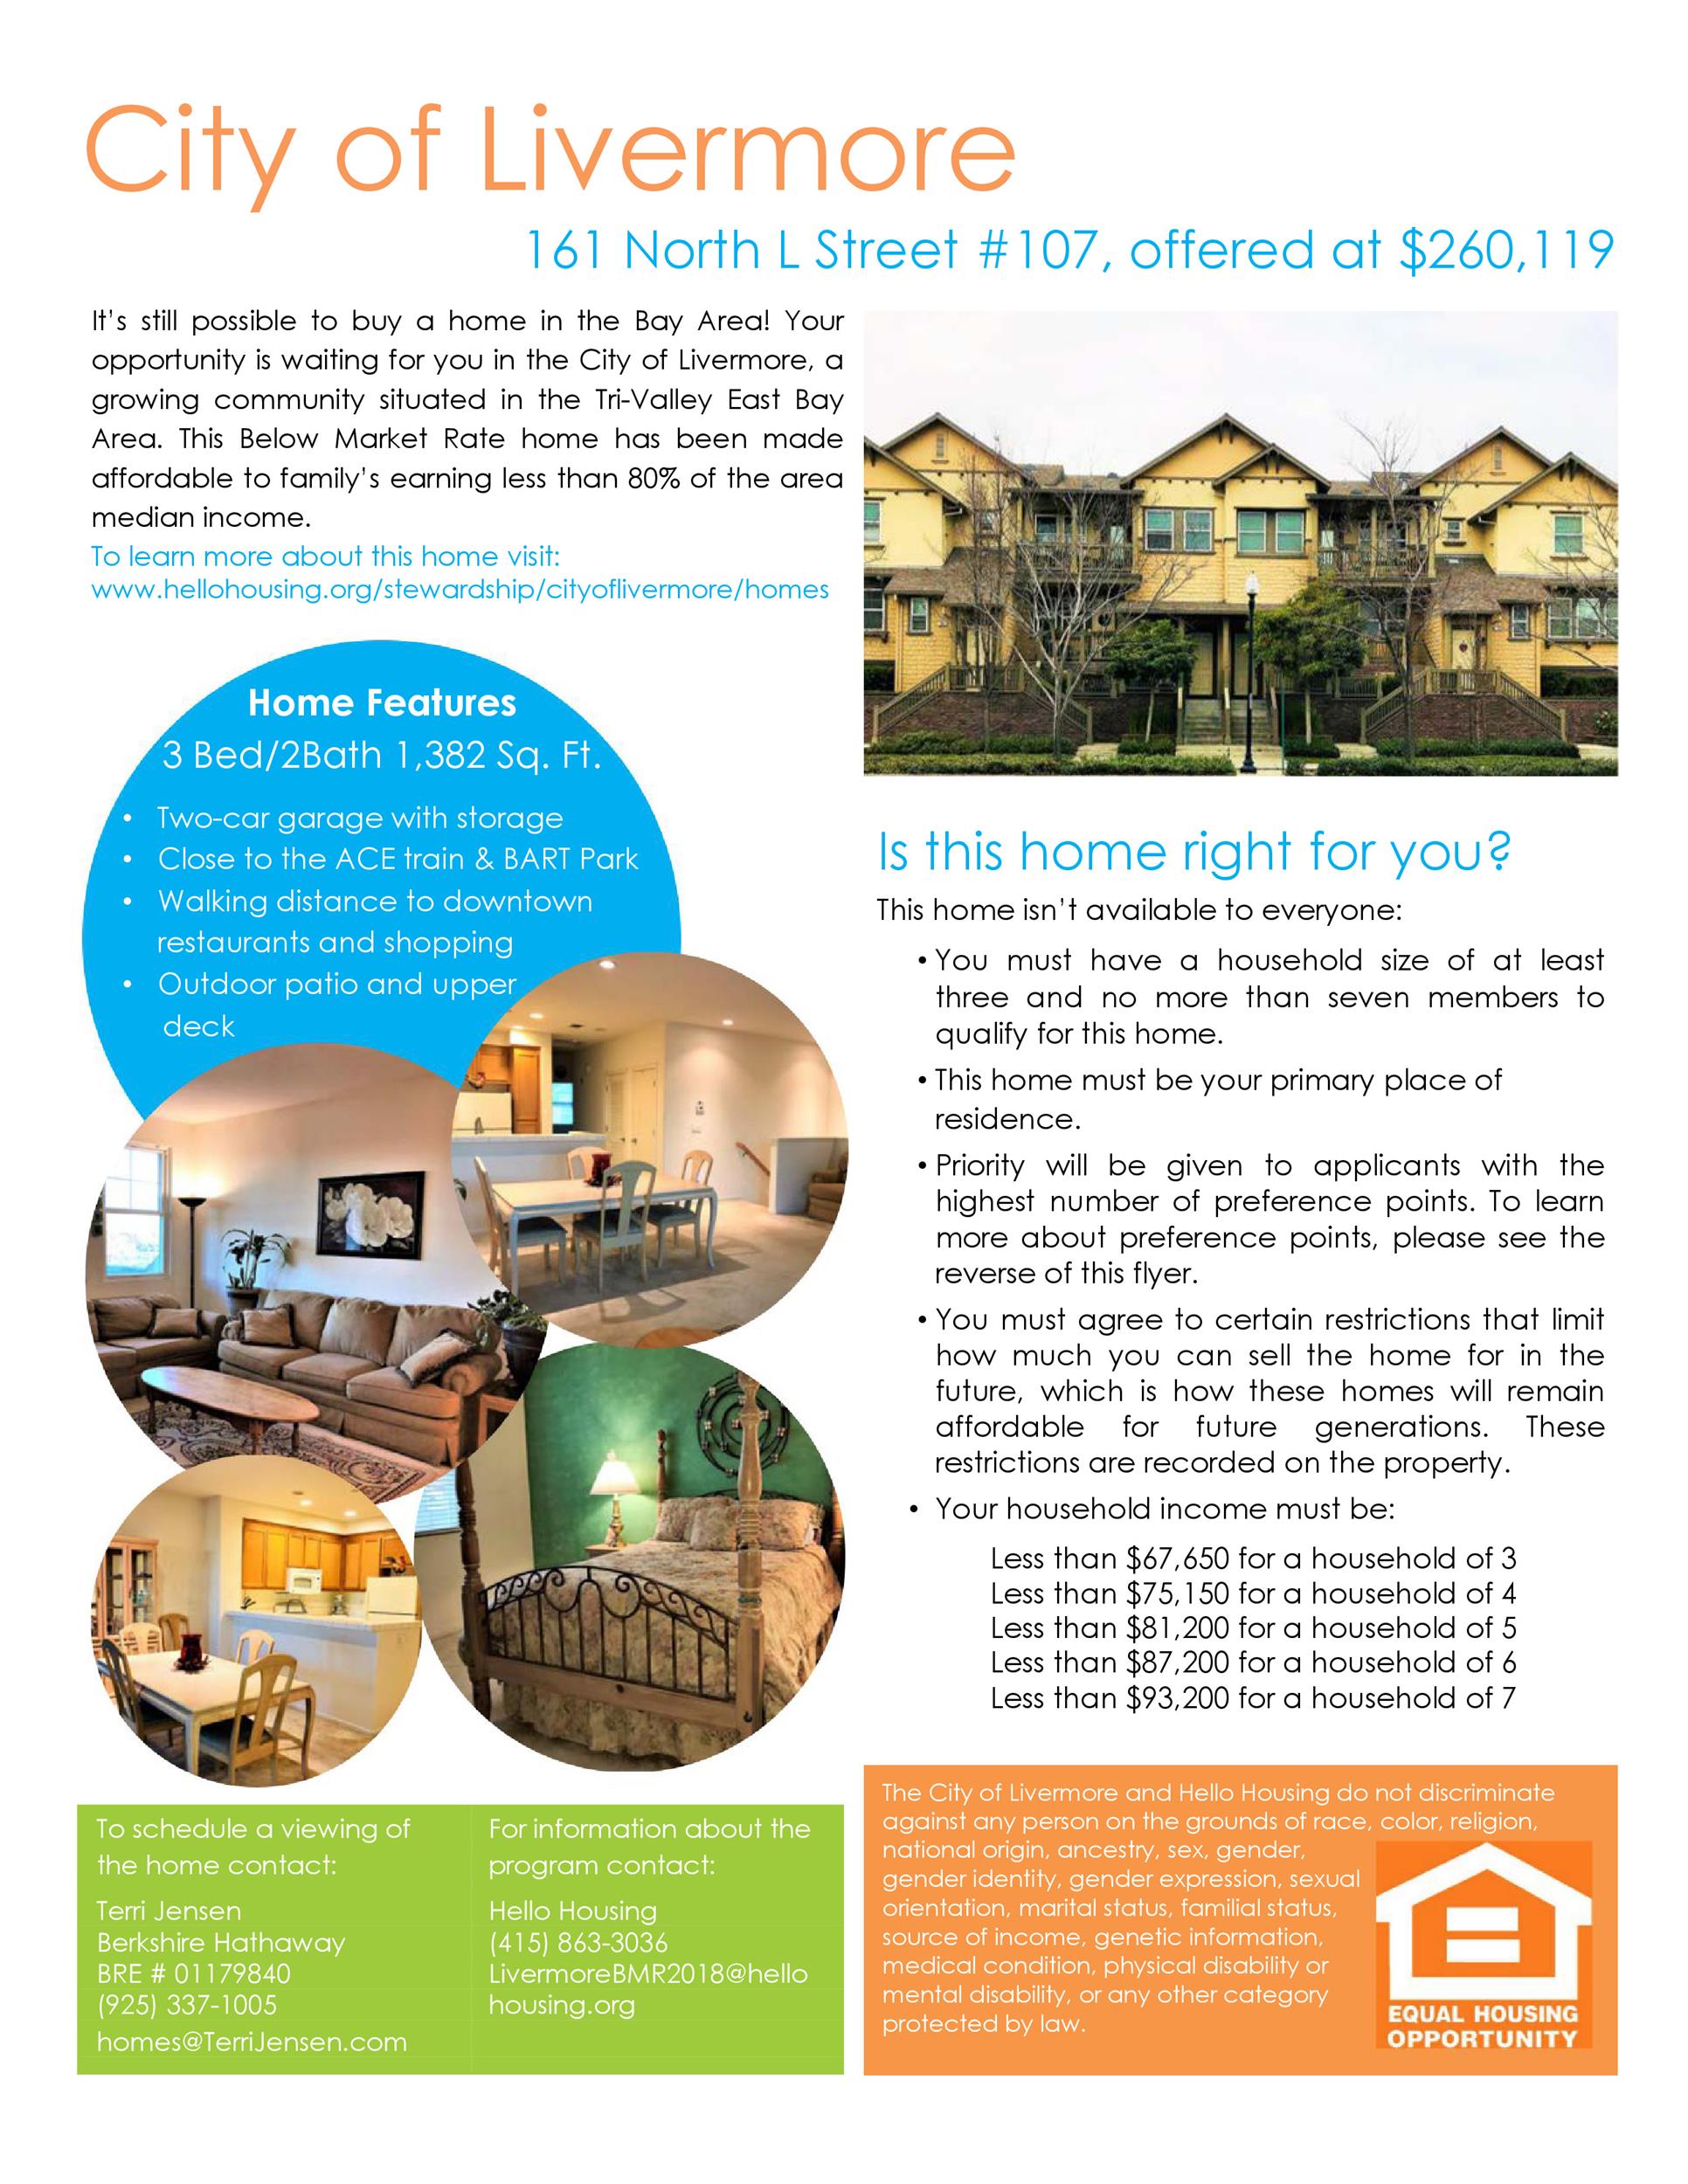 47 Amazing House For Sale Flyers (100 Free) ᐅ TemplateLab